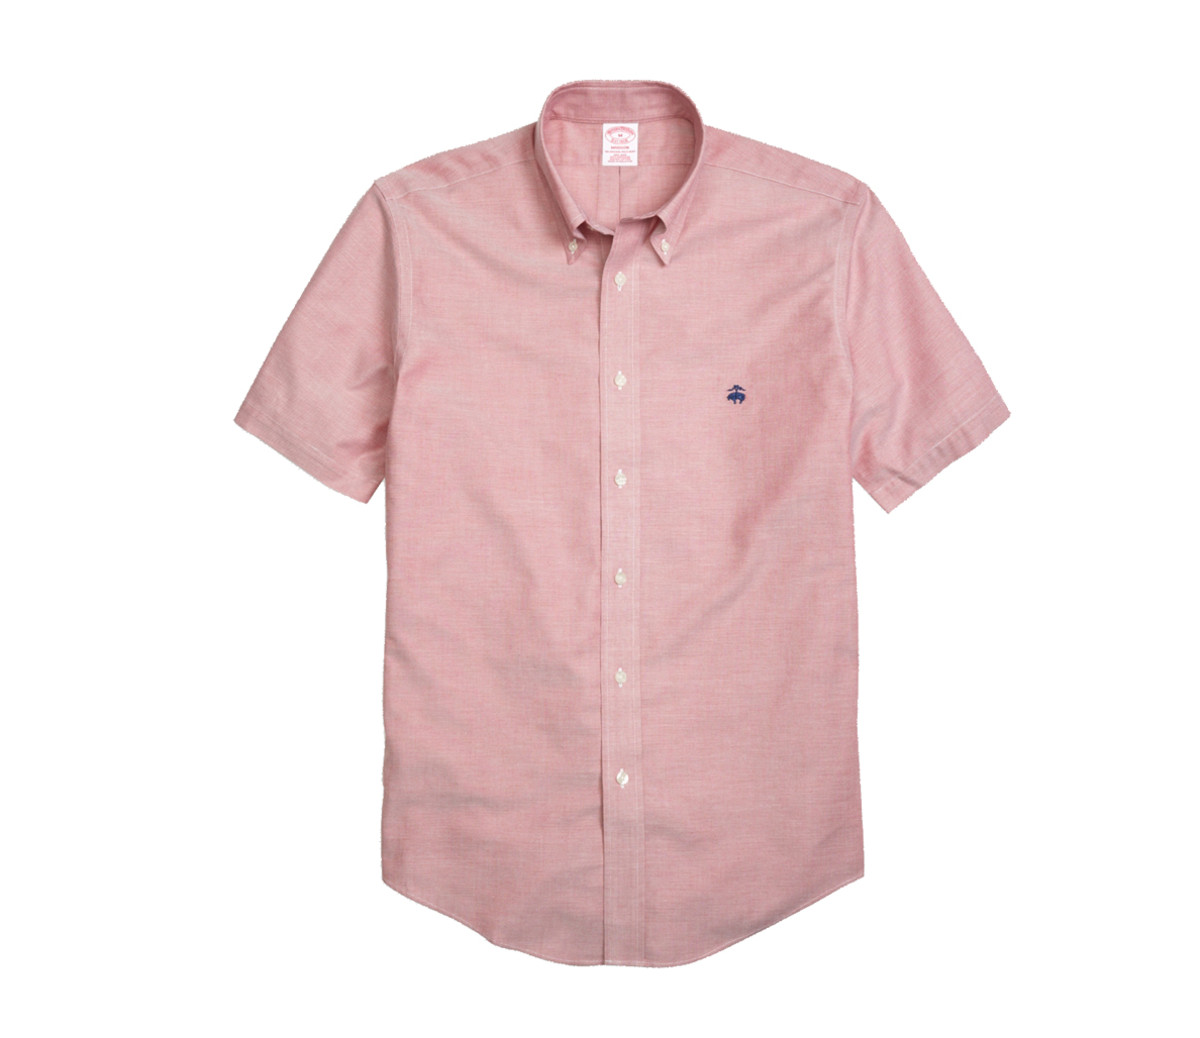 How to Wear The Color of the Year: 10 Stylish Menswear Pieces in Rose ...